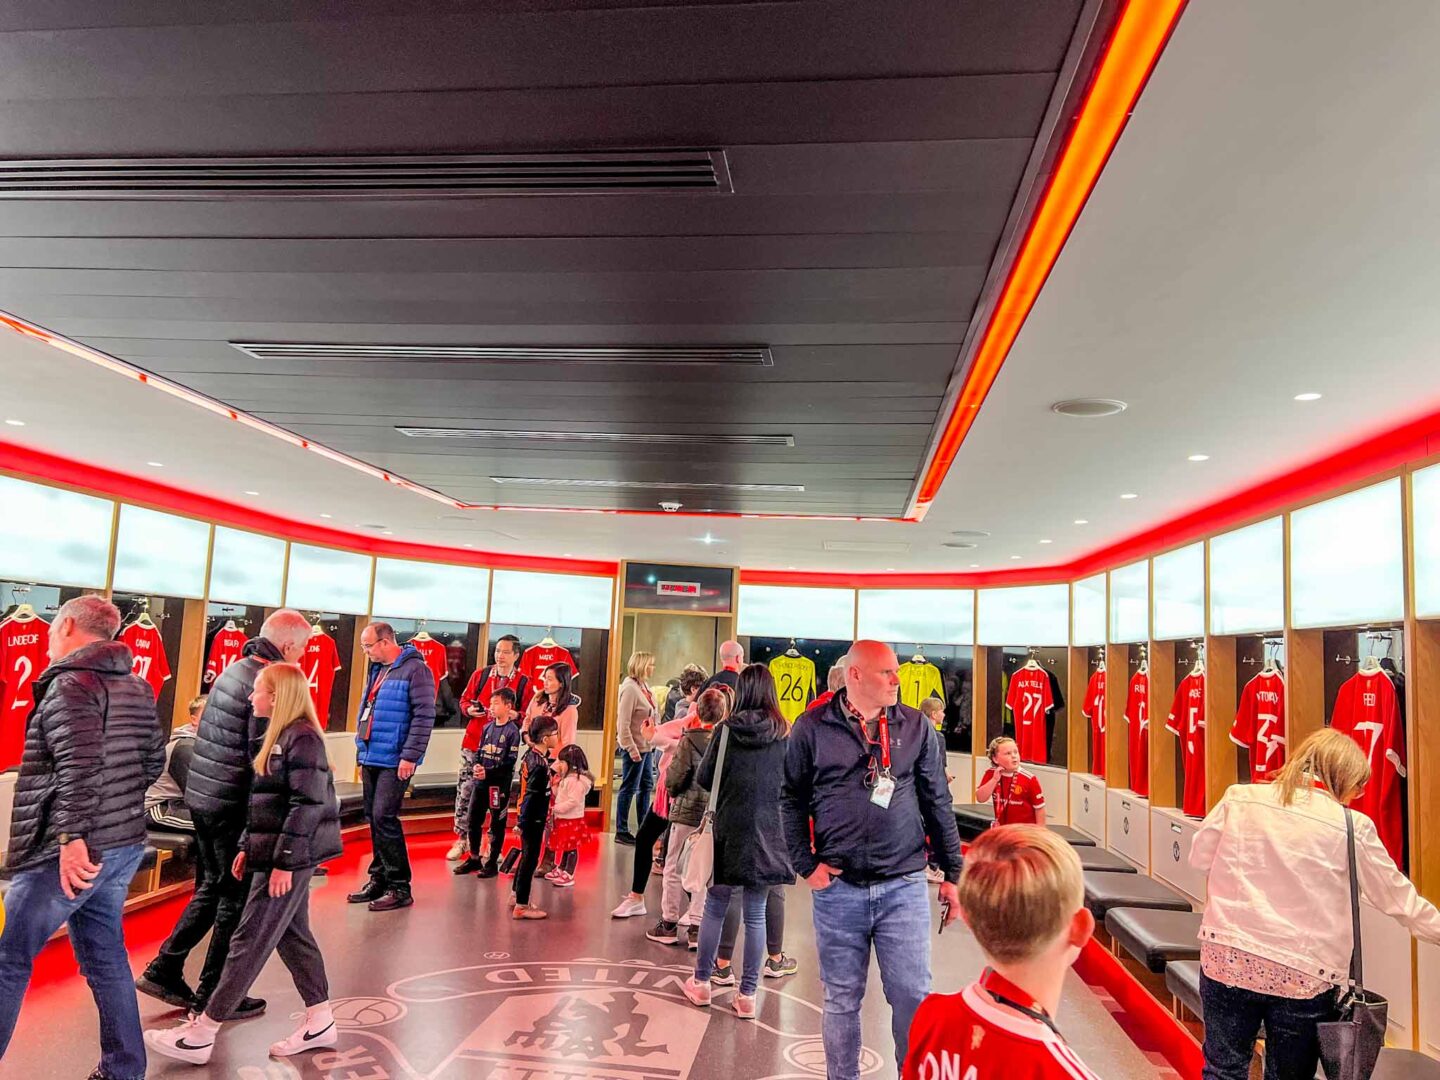 Things to do near Manchester Airport, Manchester United Stadium tour inside changing rooms